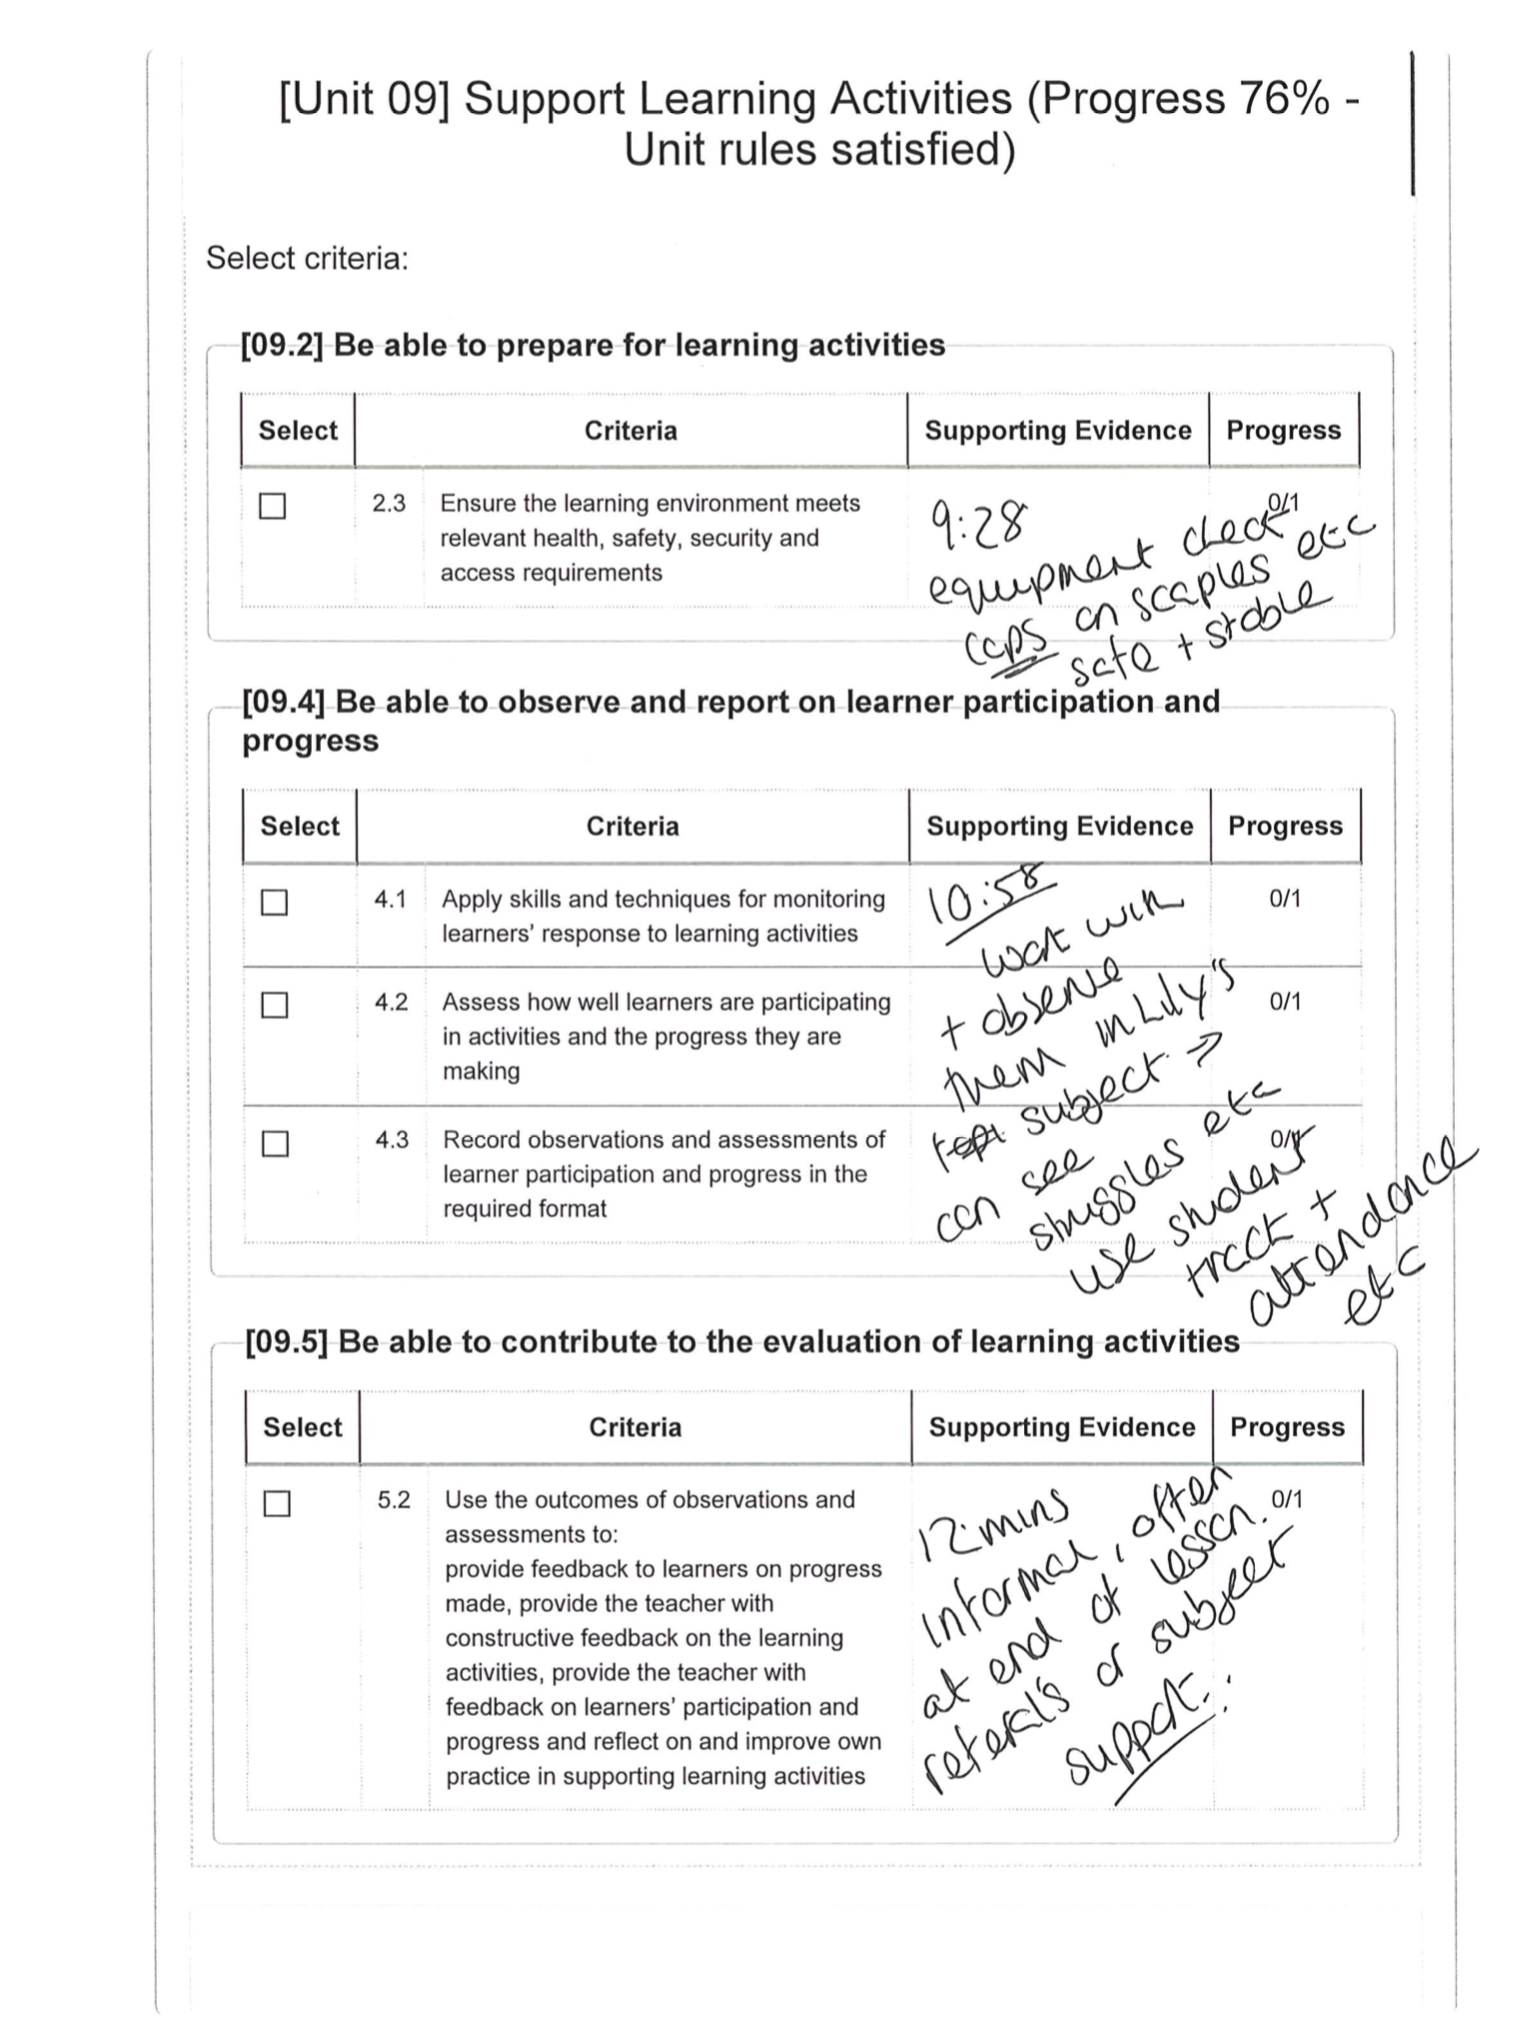 tda 2.10 support learning activities